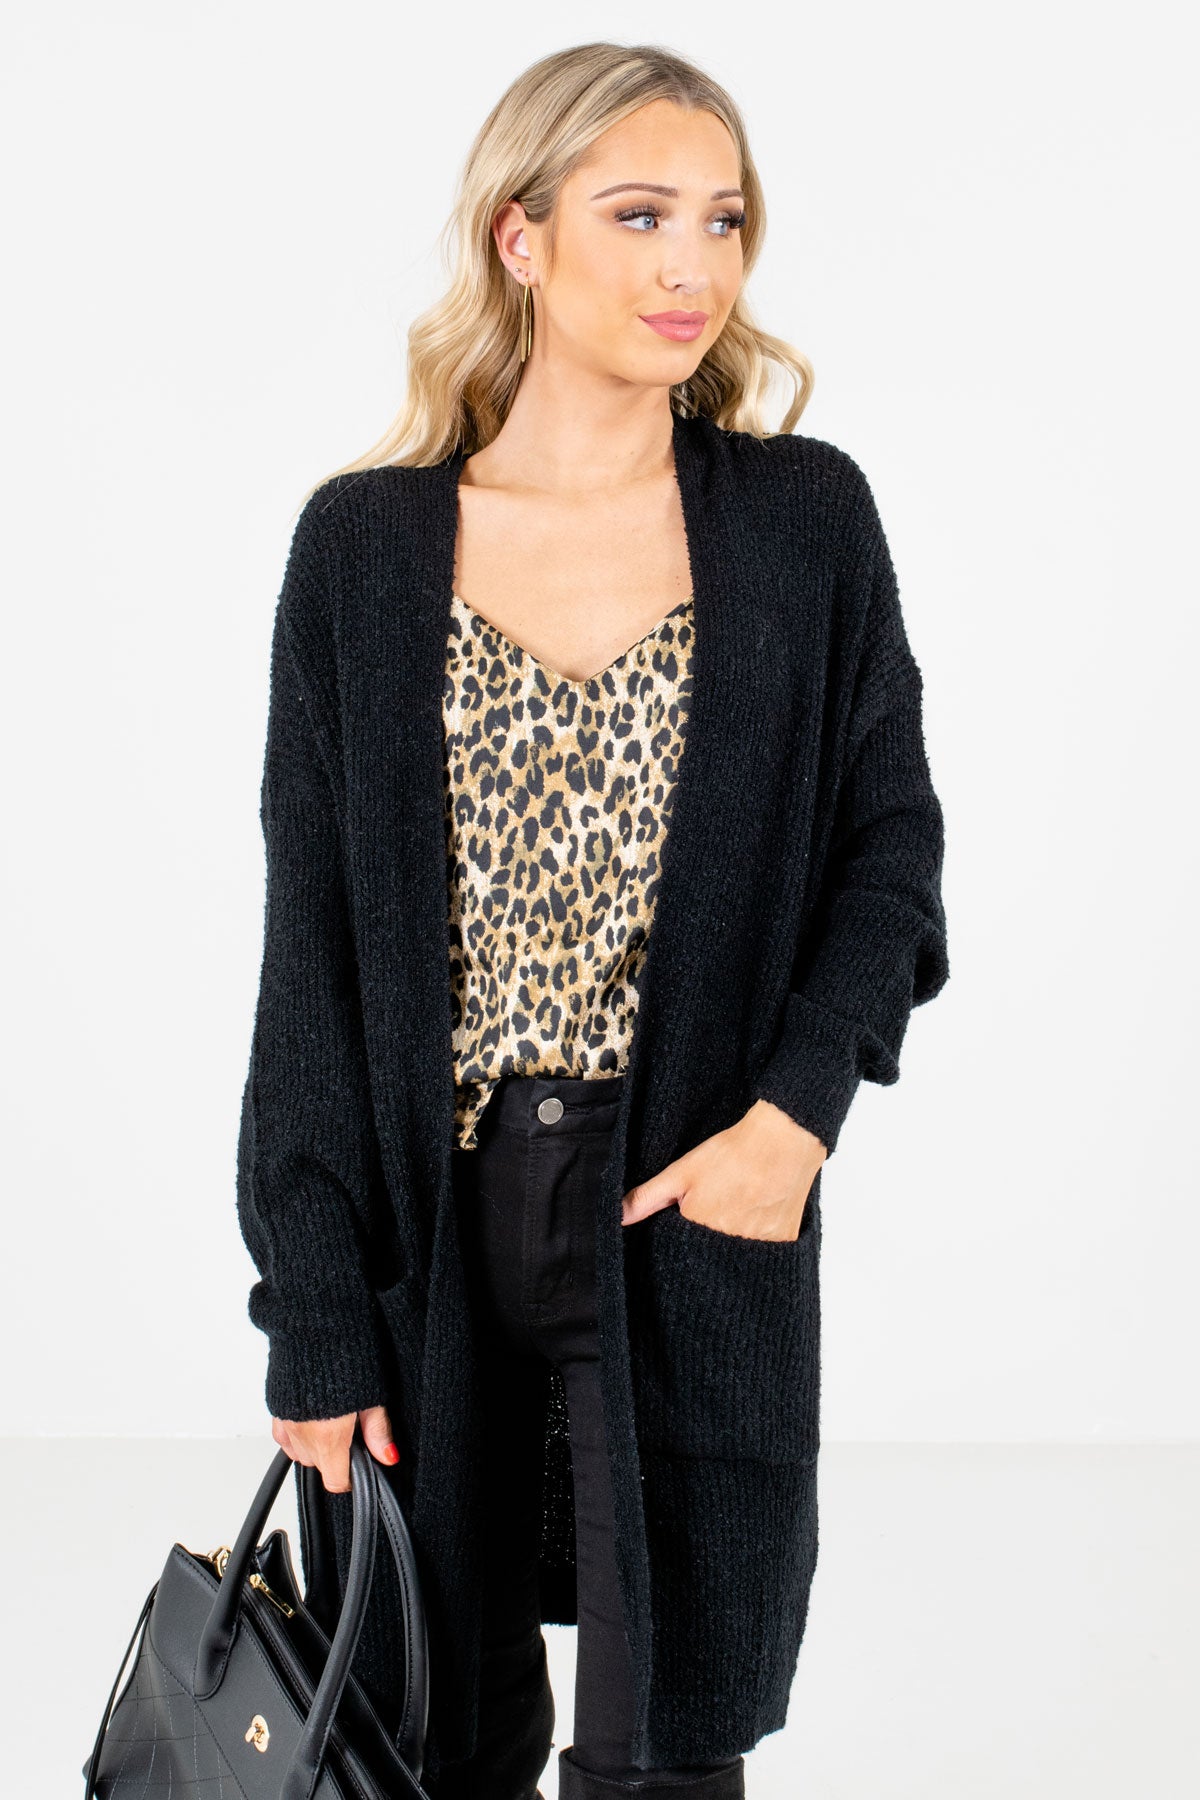 Black High-Quality Knit Material Boutique Cardigans for Women